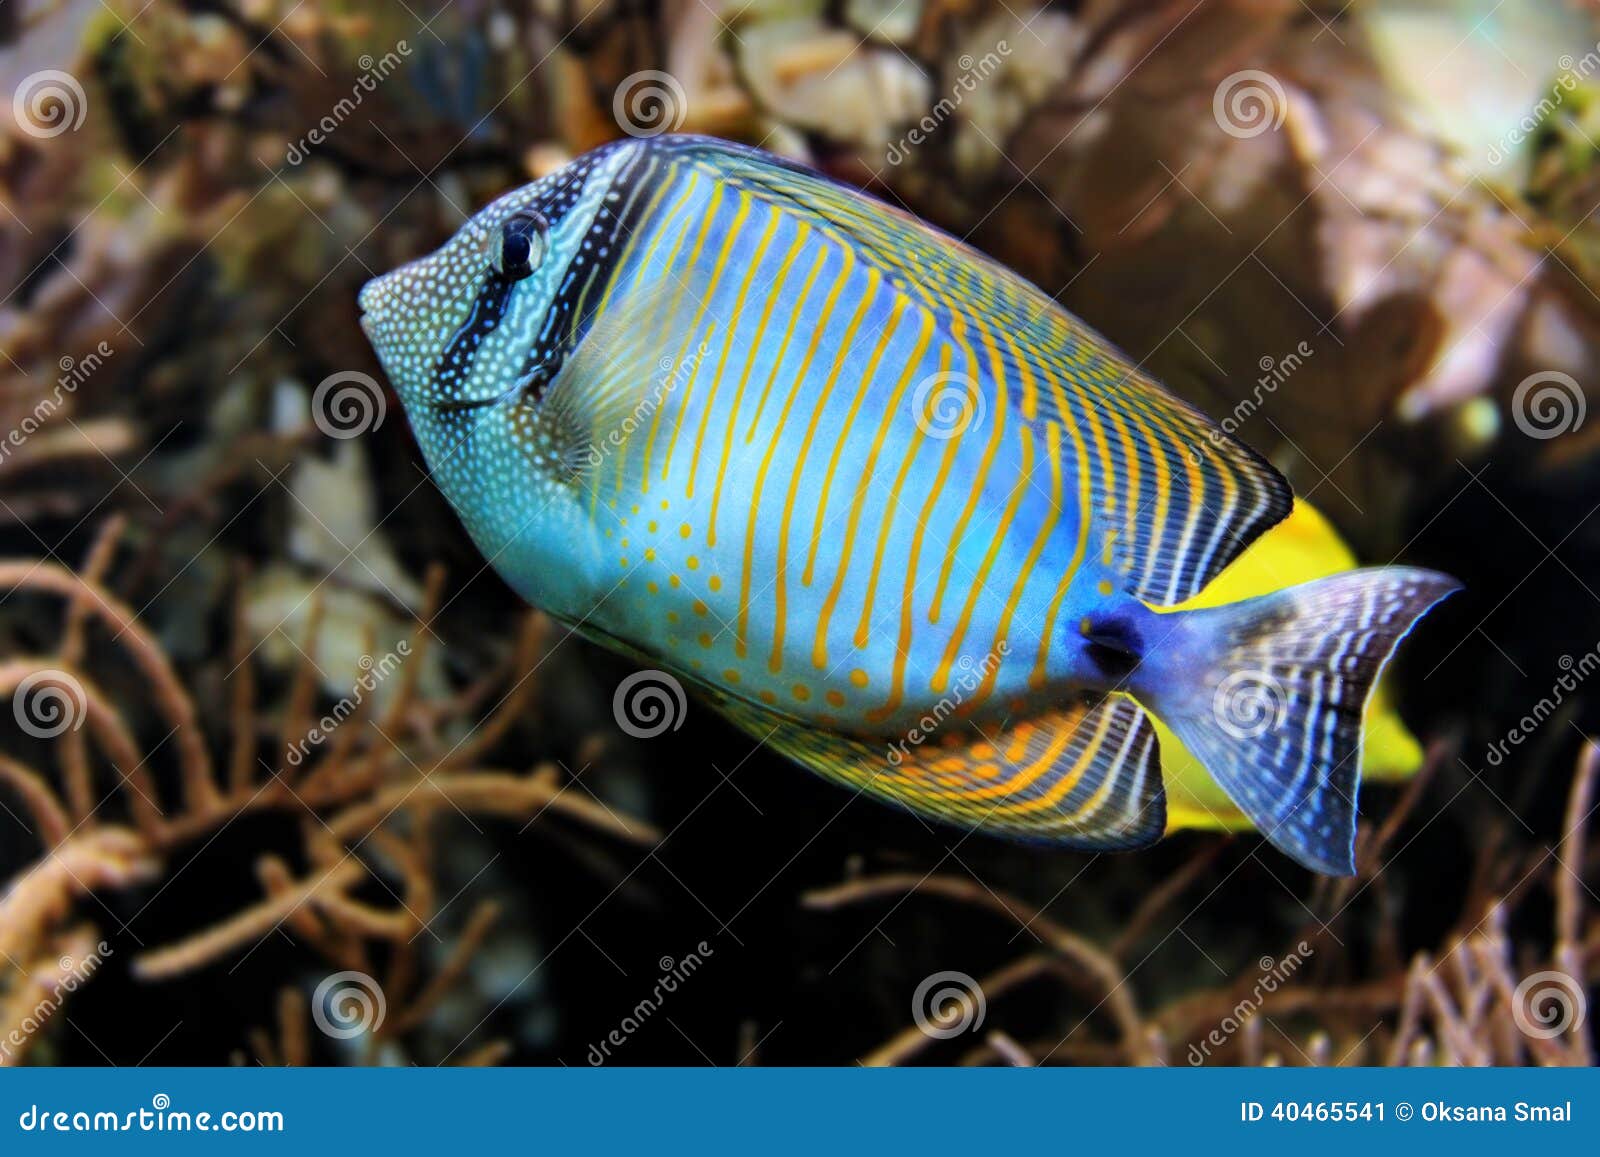 tropical fish in coral reefs